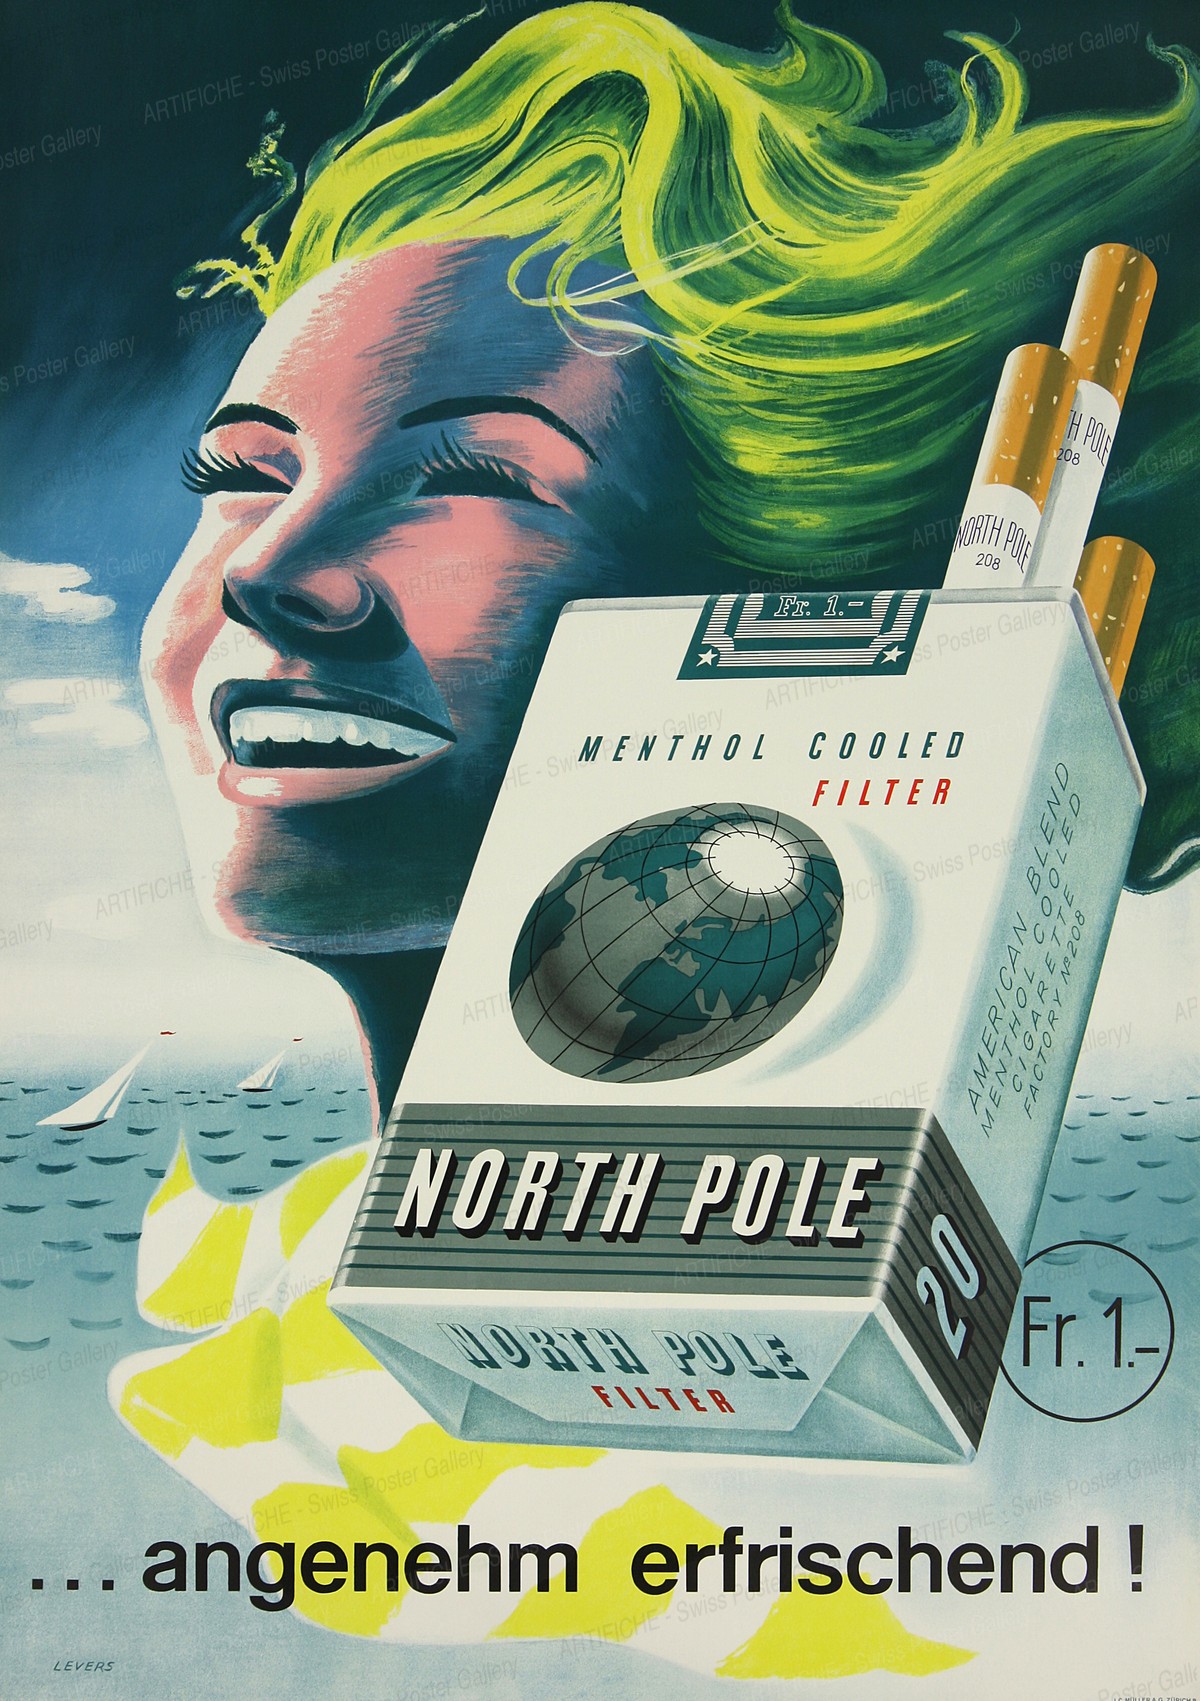 North Pole menthol cooled filter … pleasantly refreshing!, Rudolph Levers